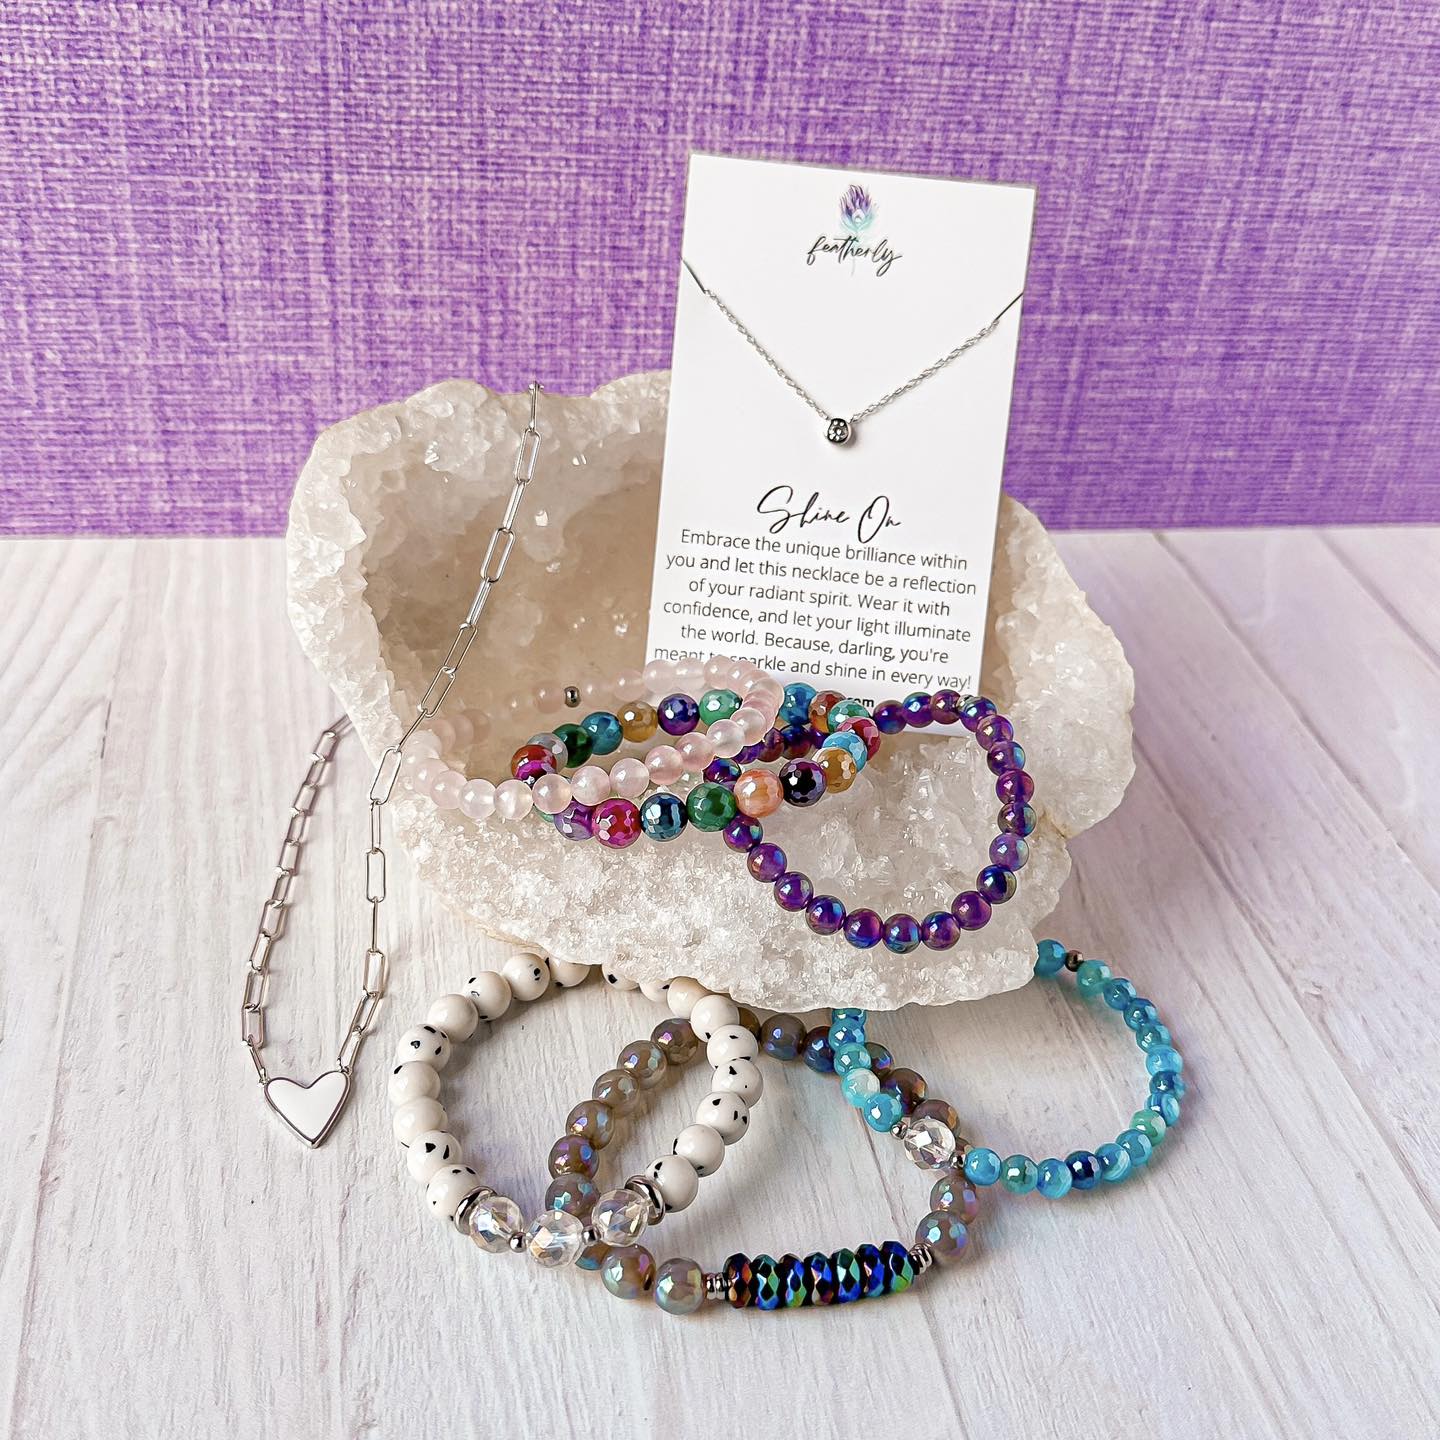 Popular sterling silver necklaces and beaded bracelets from Featherly